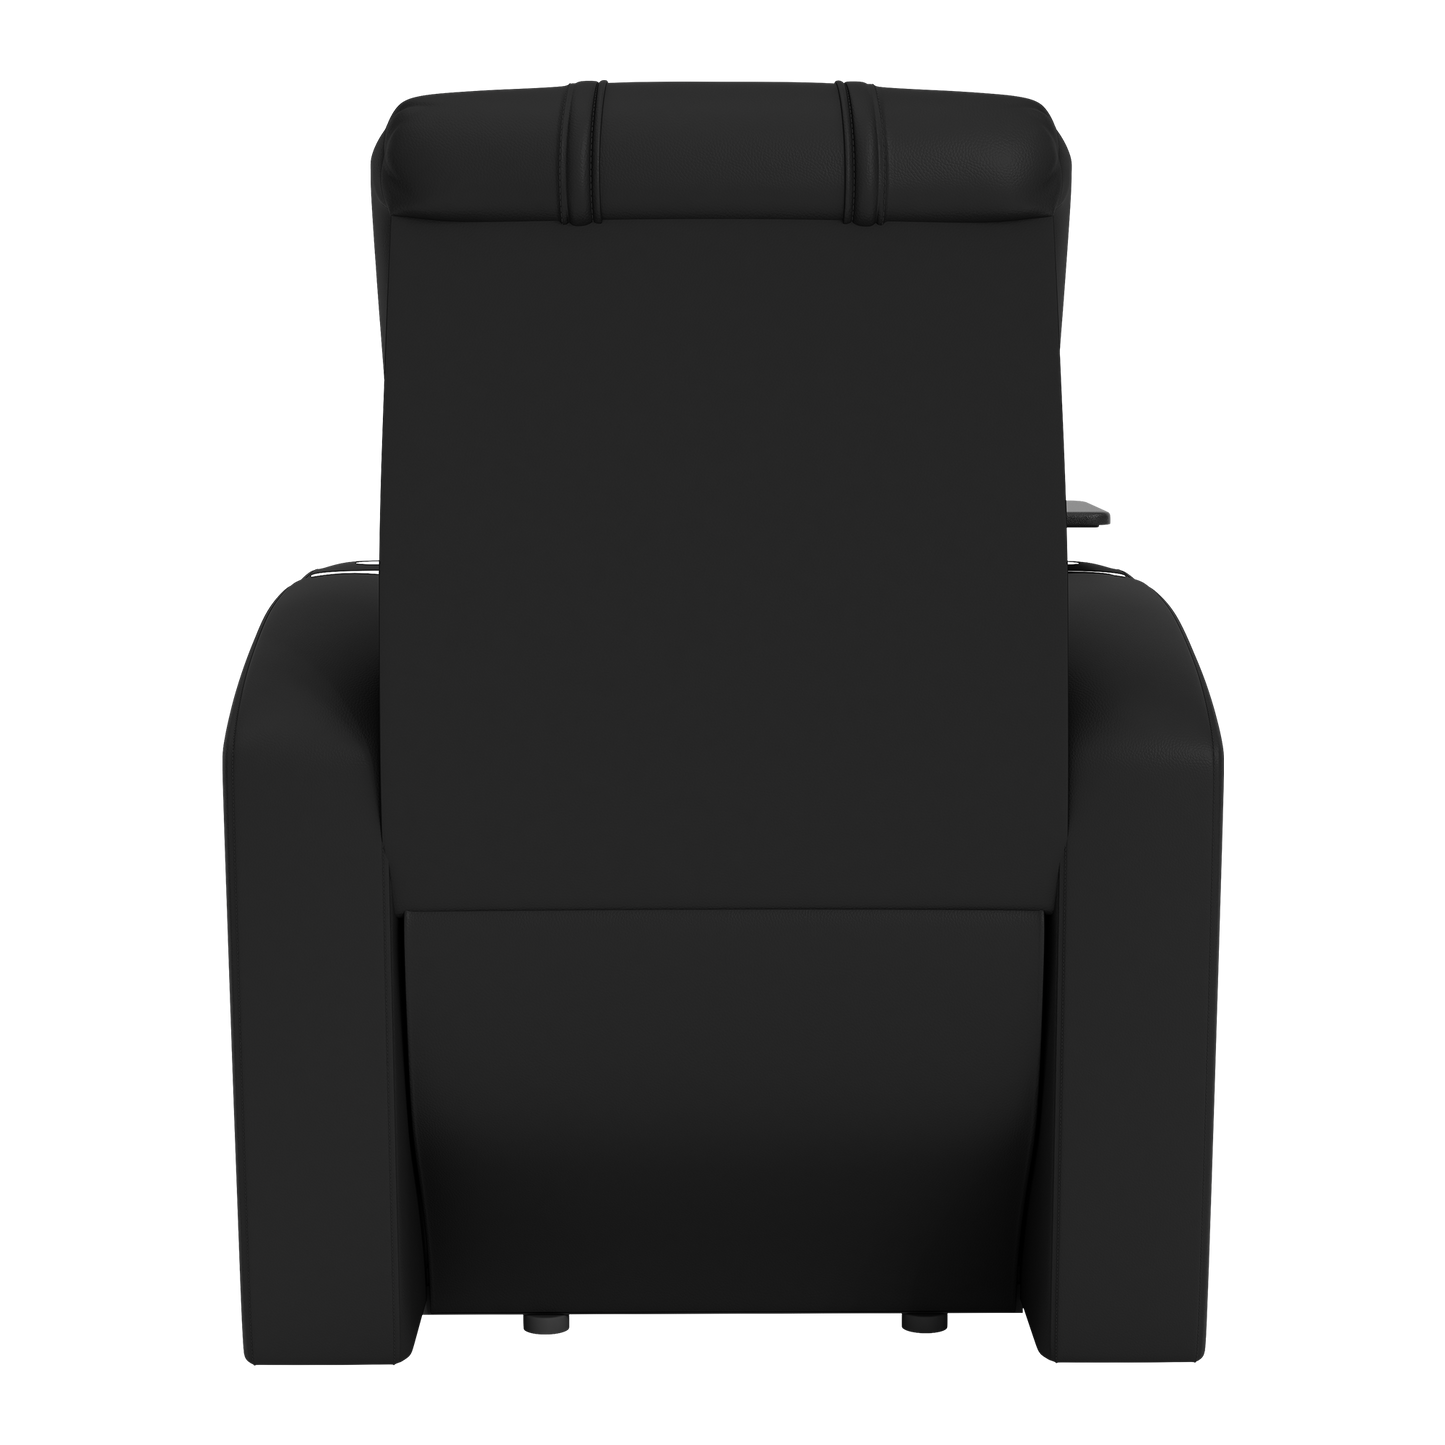 Stealth Power Plus Recliner with U Sports Gaming Logo